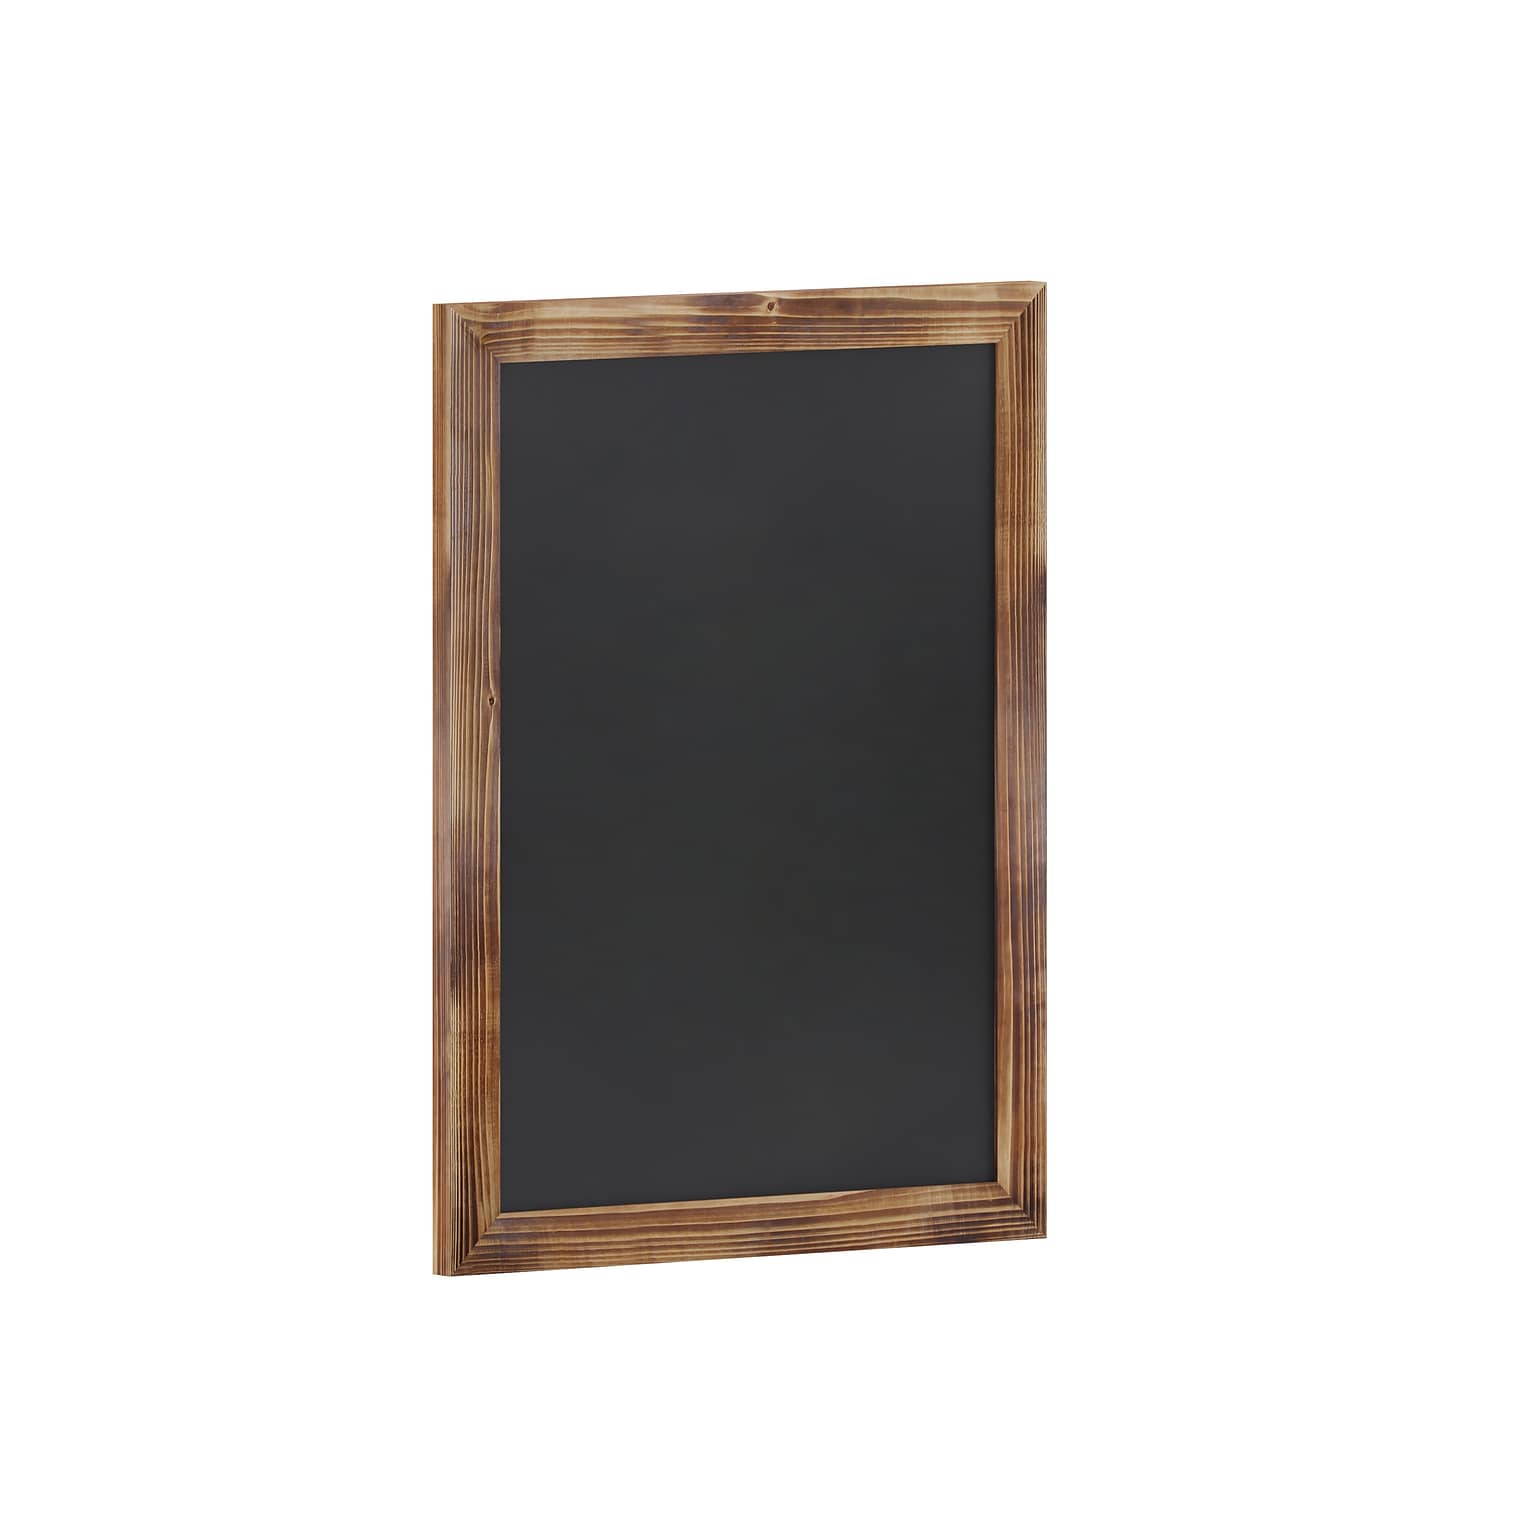 Flash Furniture Canterbury Wall Mount Magnetic Chalkboard Sign, Torched, 18 x 24 (HGWAGDIS852315)